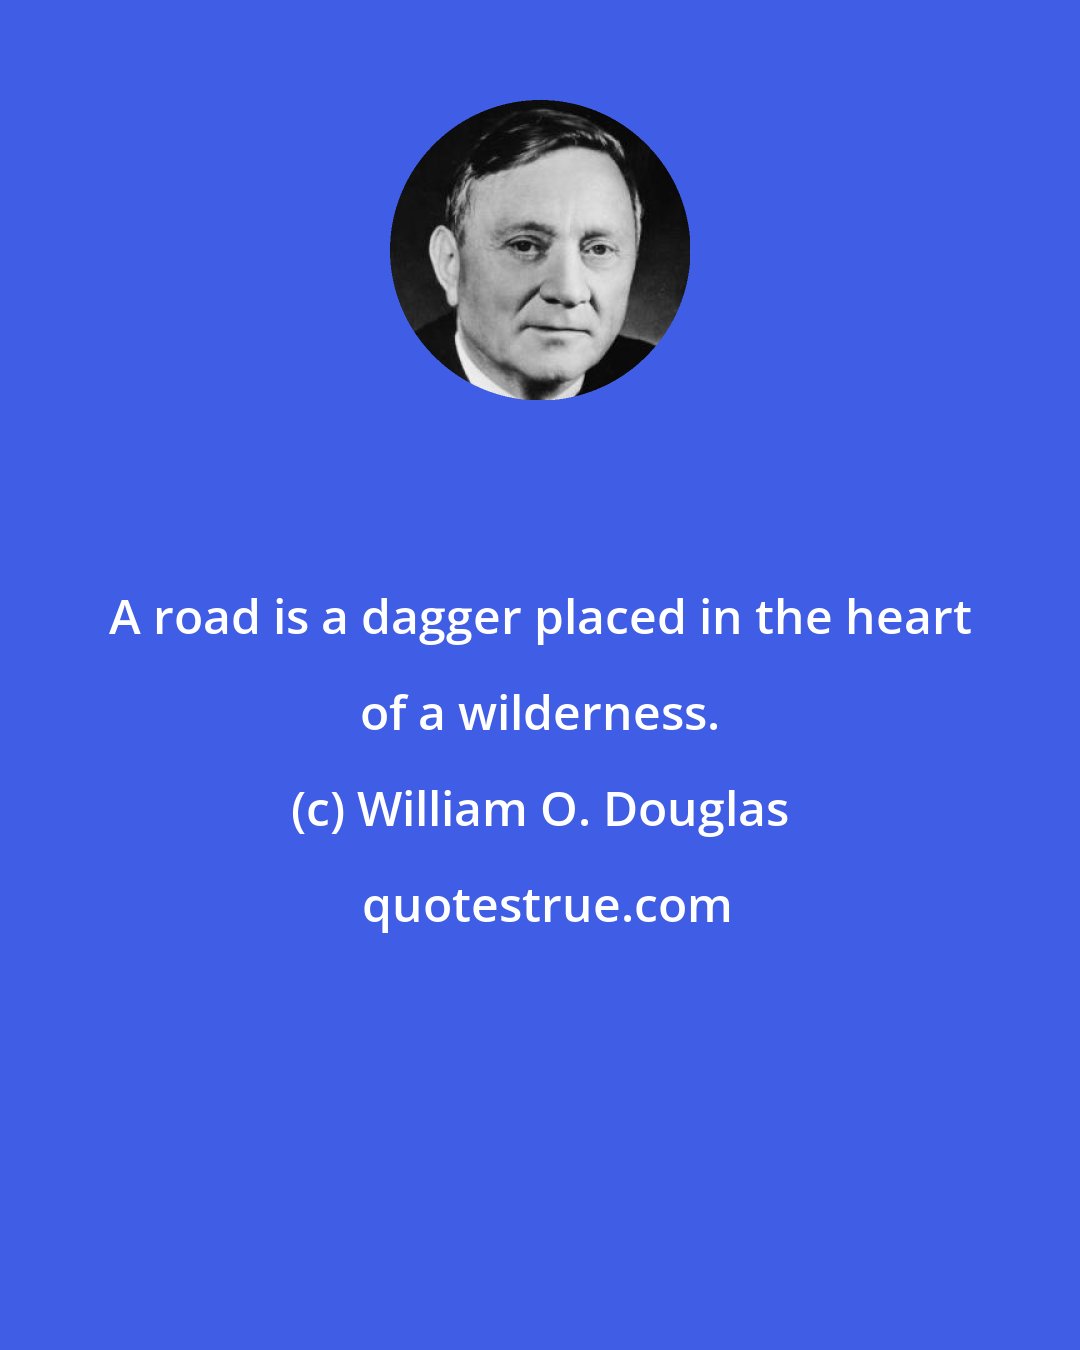 William O. Douglas: A road is a dagger placed in the heart of a wilderness.